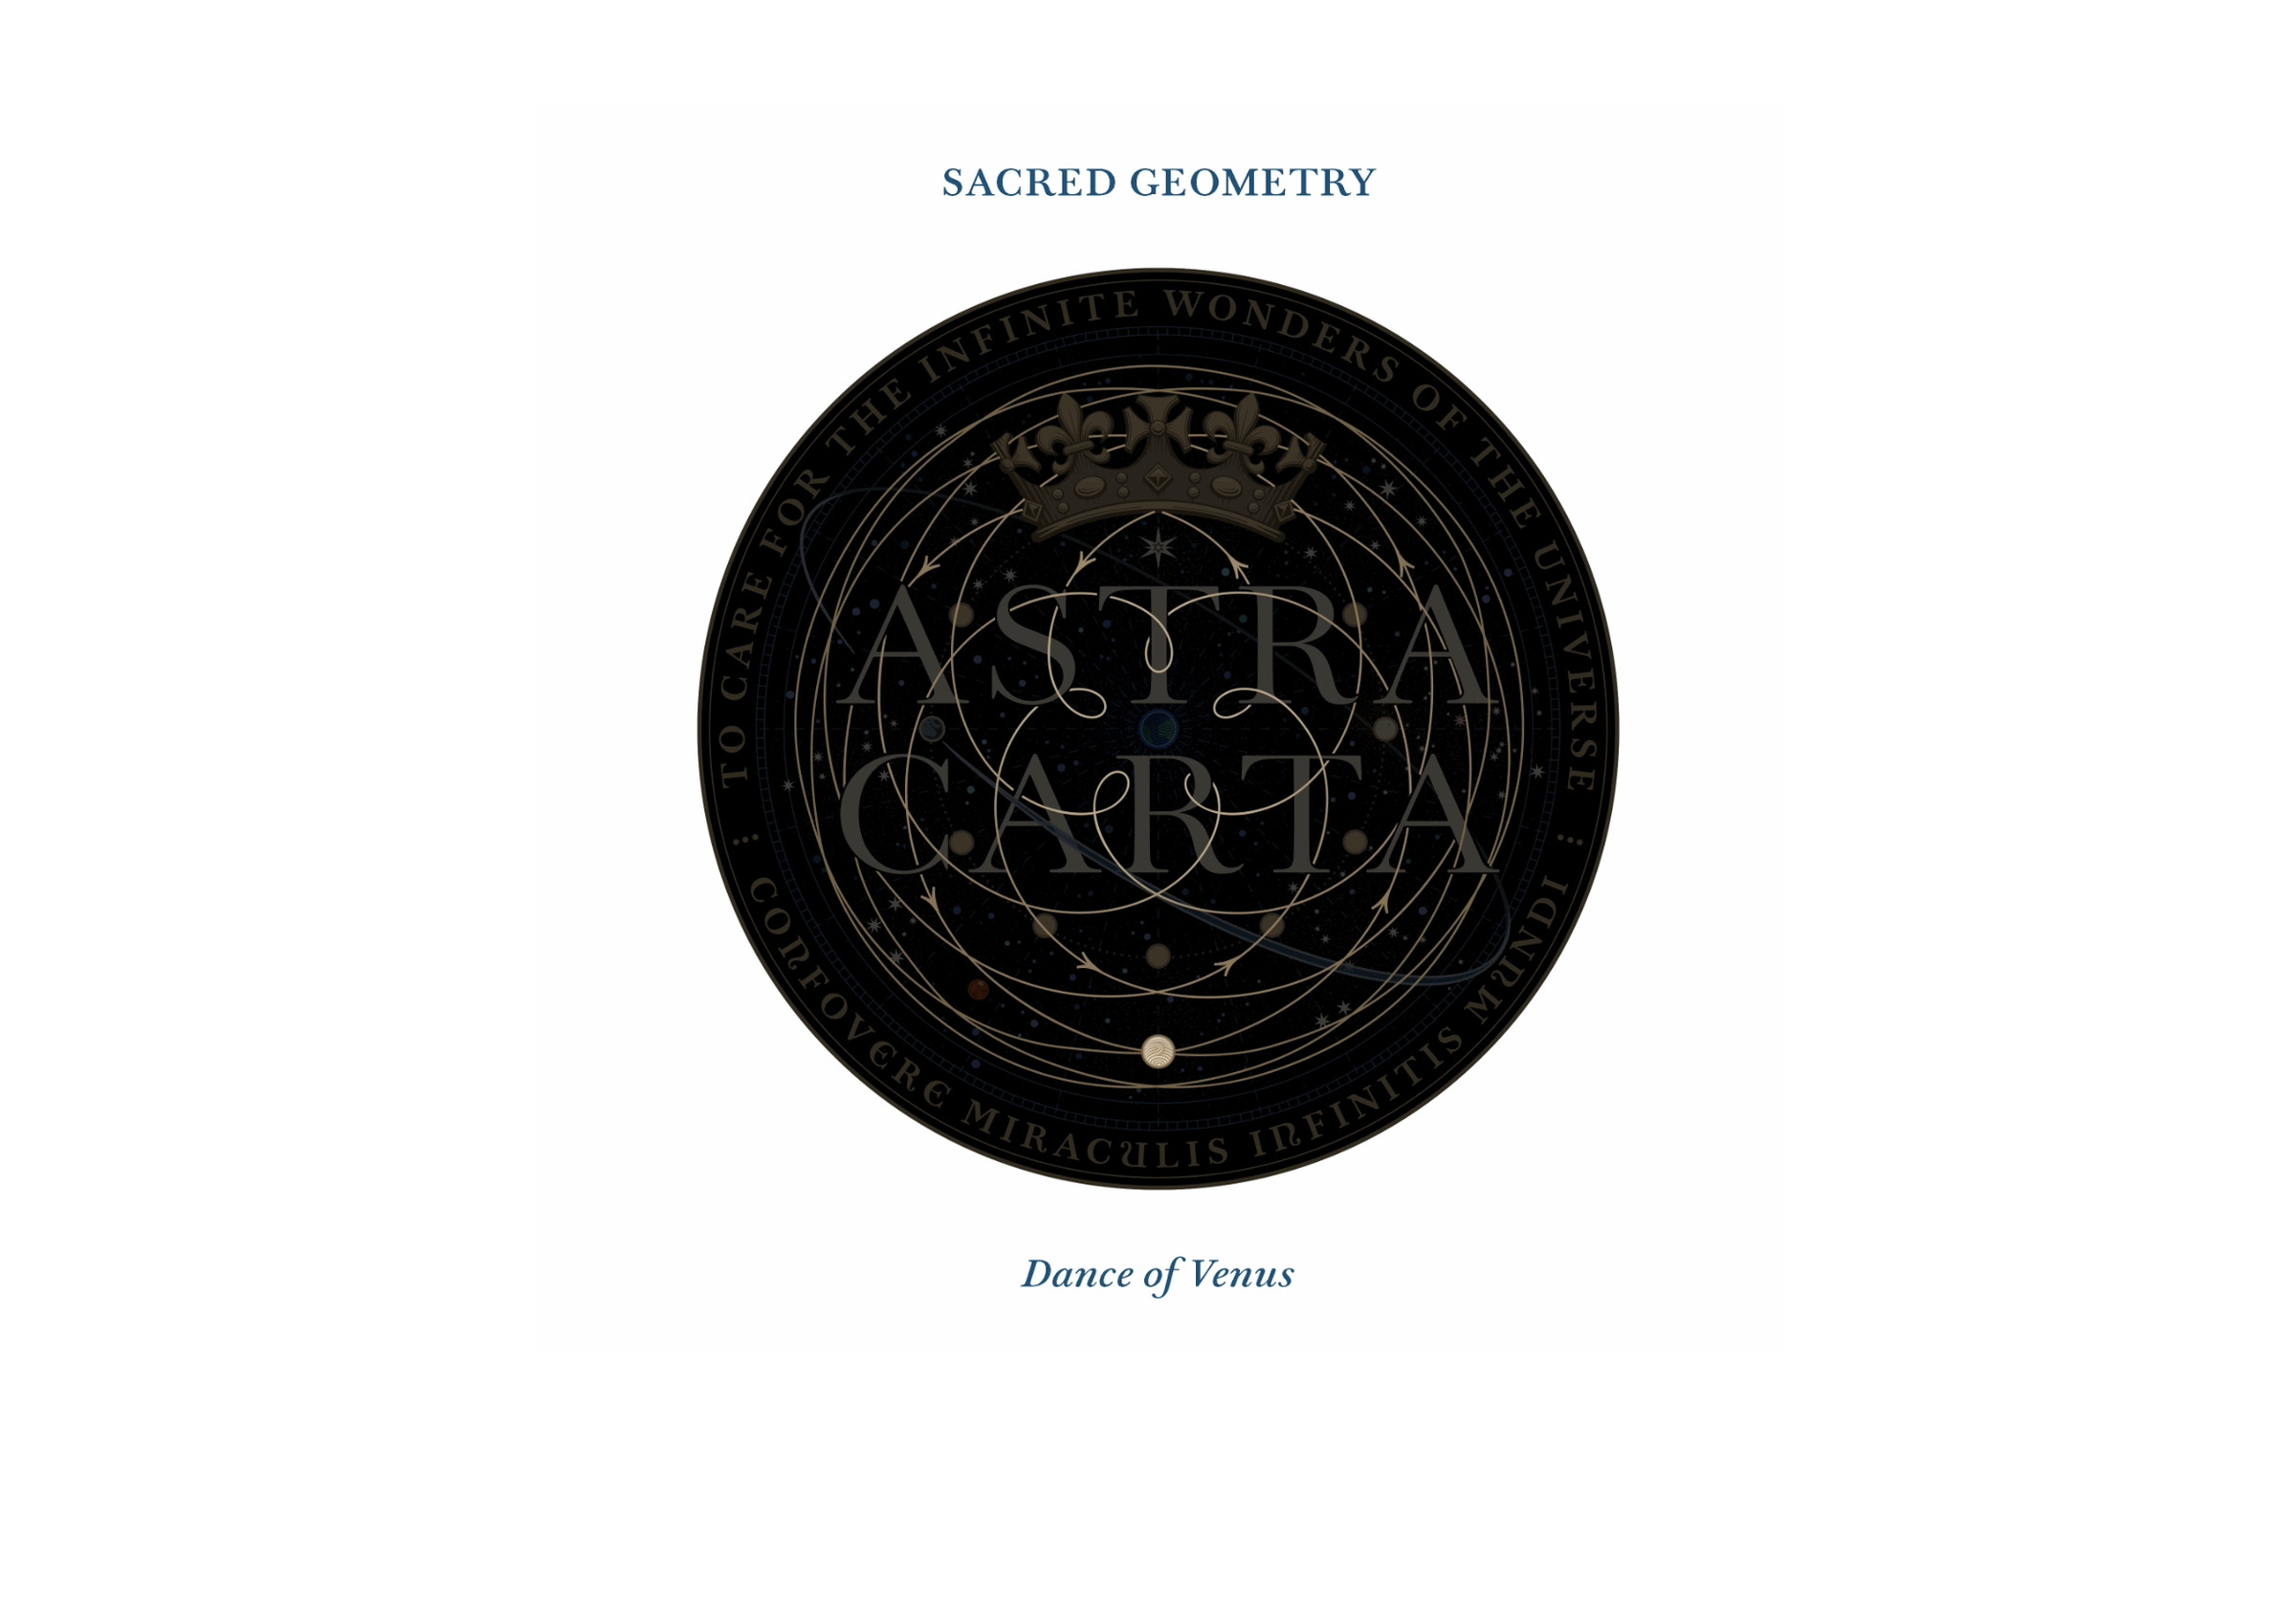 An image showing the famous “Dance of Venus” incorporated into the Astra Carta seal.